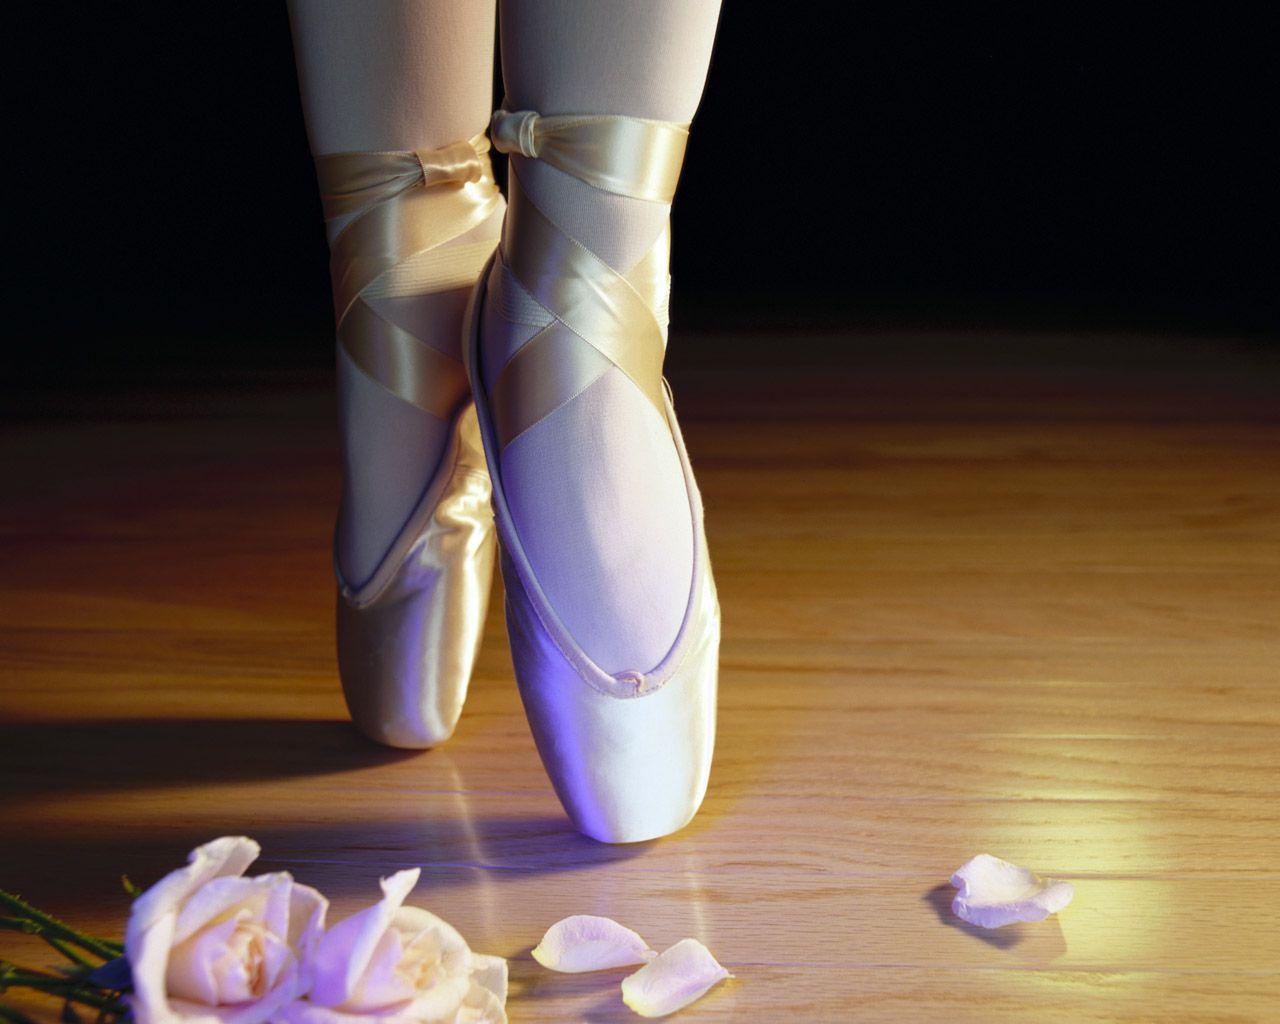 Ballet Pointe Shoes Background. Ballet